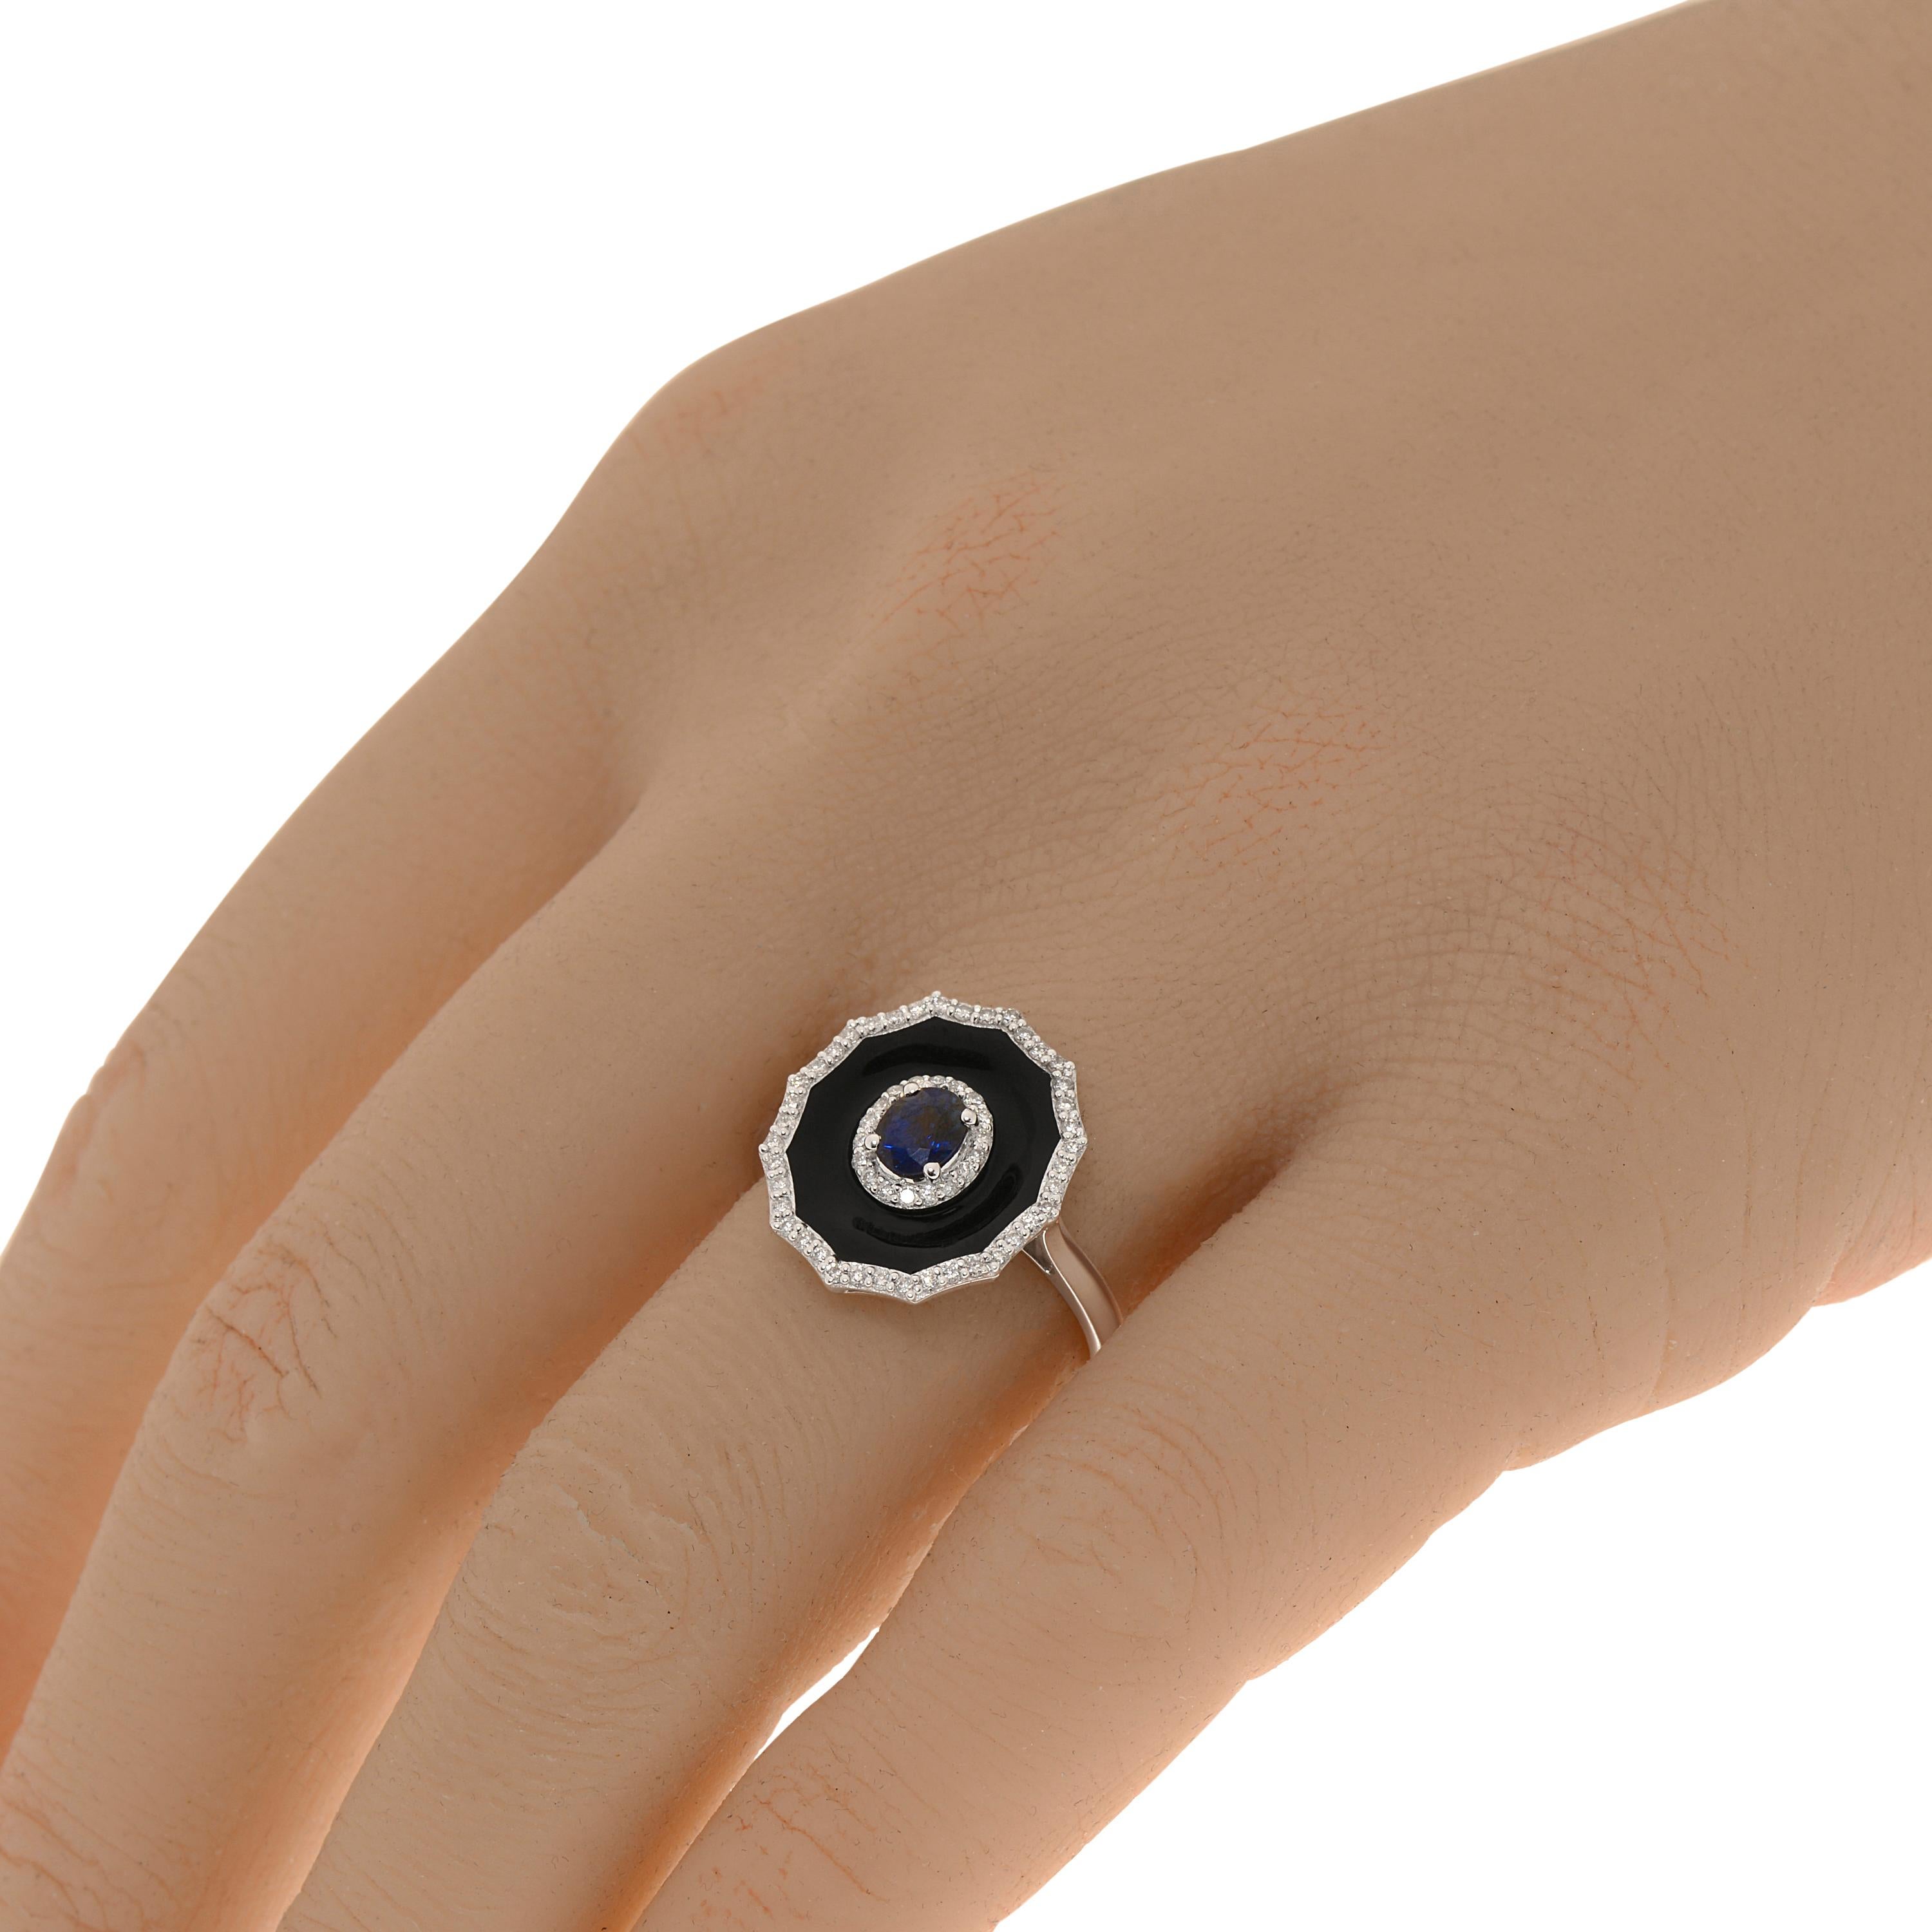 Zydo 18K white gold and enamel gemstone ring features 0.40ct. tw. blue sapphires surrounded by black enamel and 0.24ct. tw. diamond accents. The ring size is 7 (54.4). The ring measurements are 5/8